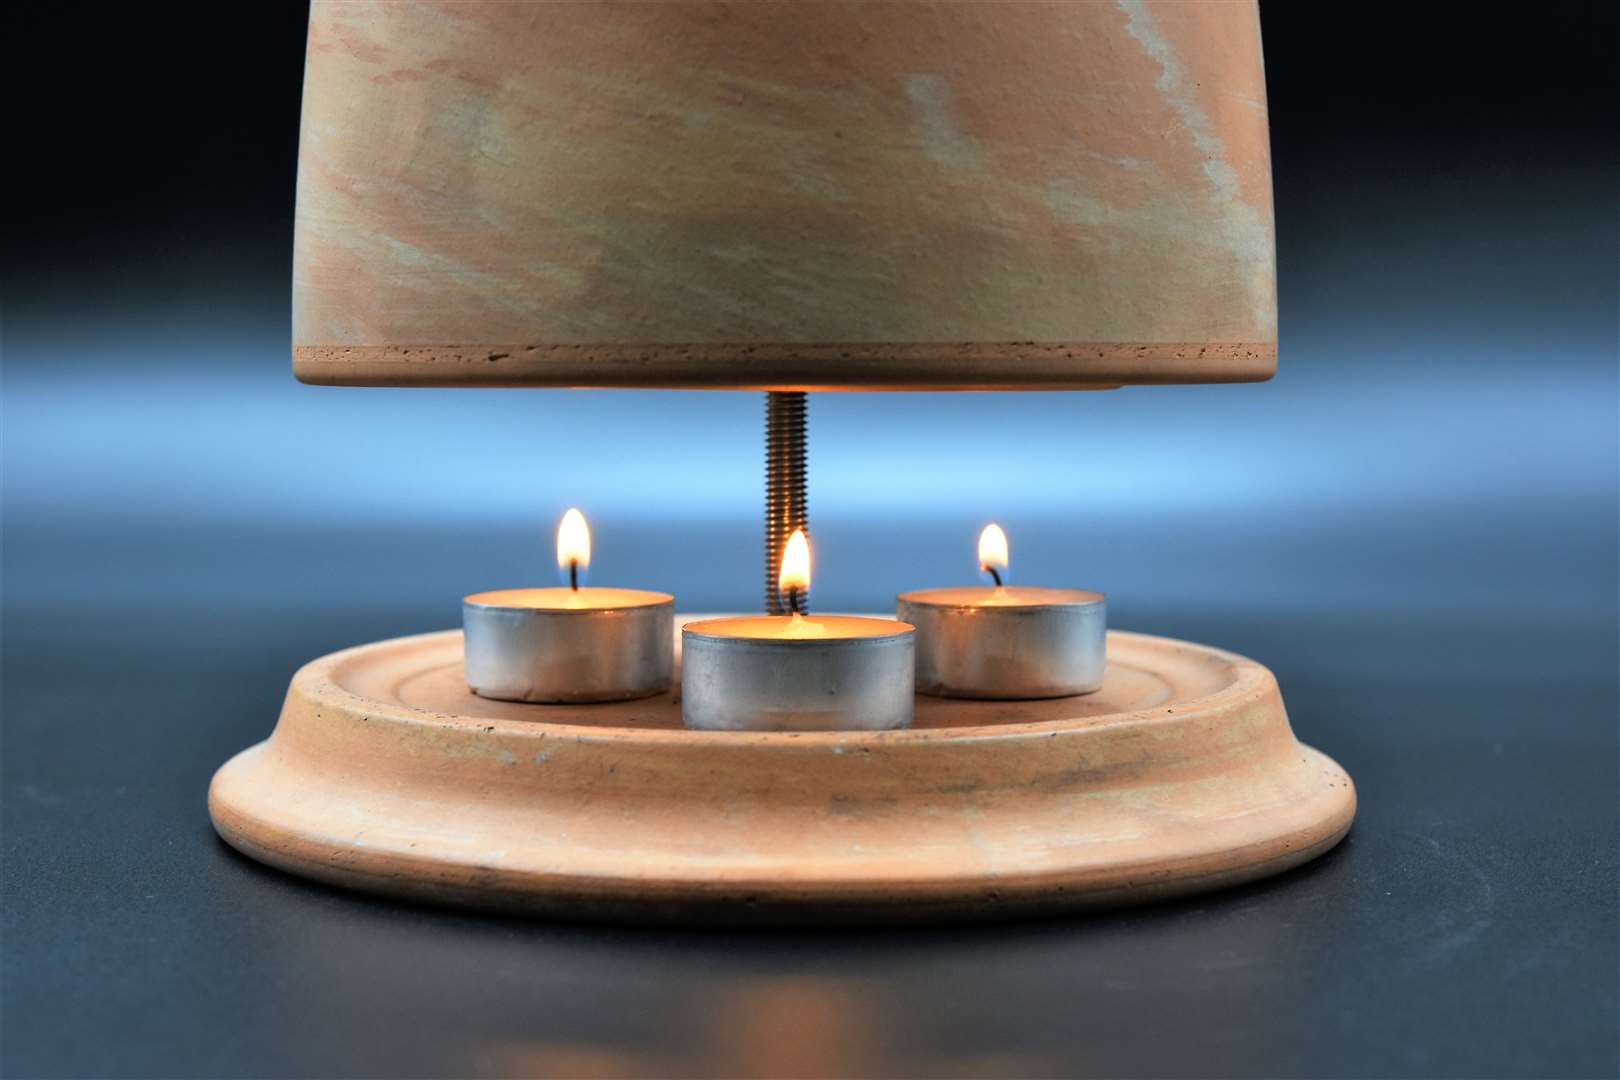 One heating hack involves tealights and a terracotta pot. Picture: Adobe Stock